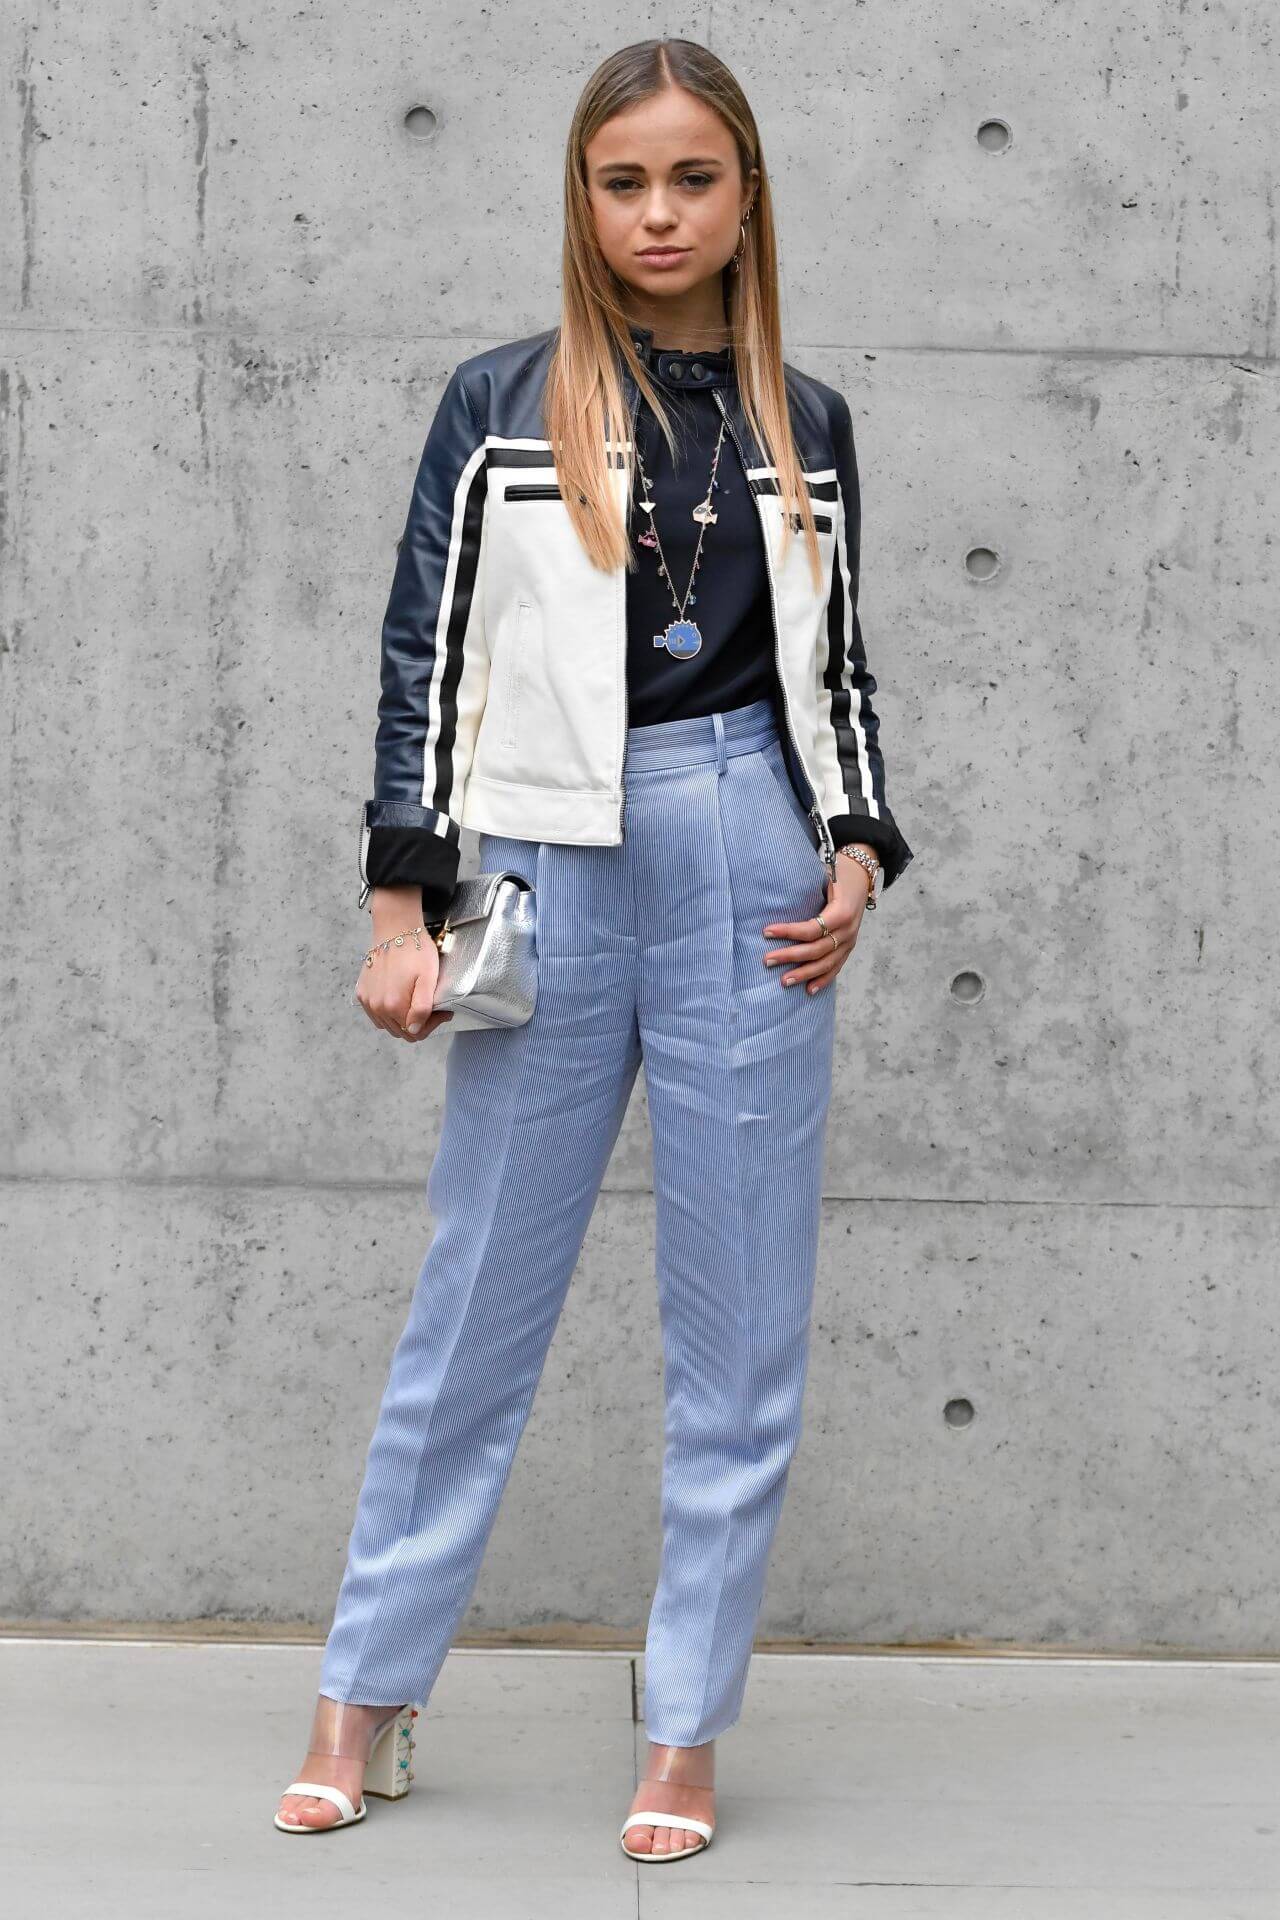 Amelia Windsor in Black Top & Ice Blue Pants With Leather Jacket At Emporio Armani Show FW18 in Milan